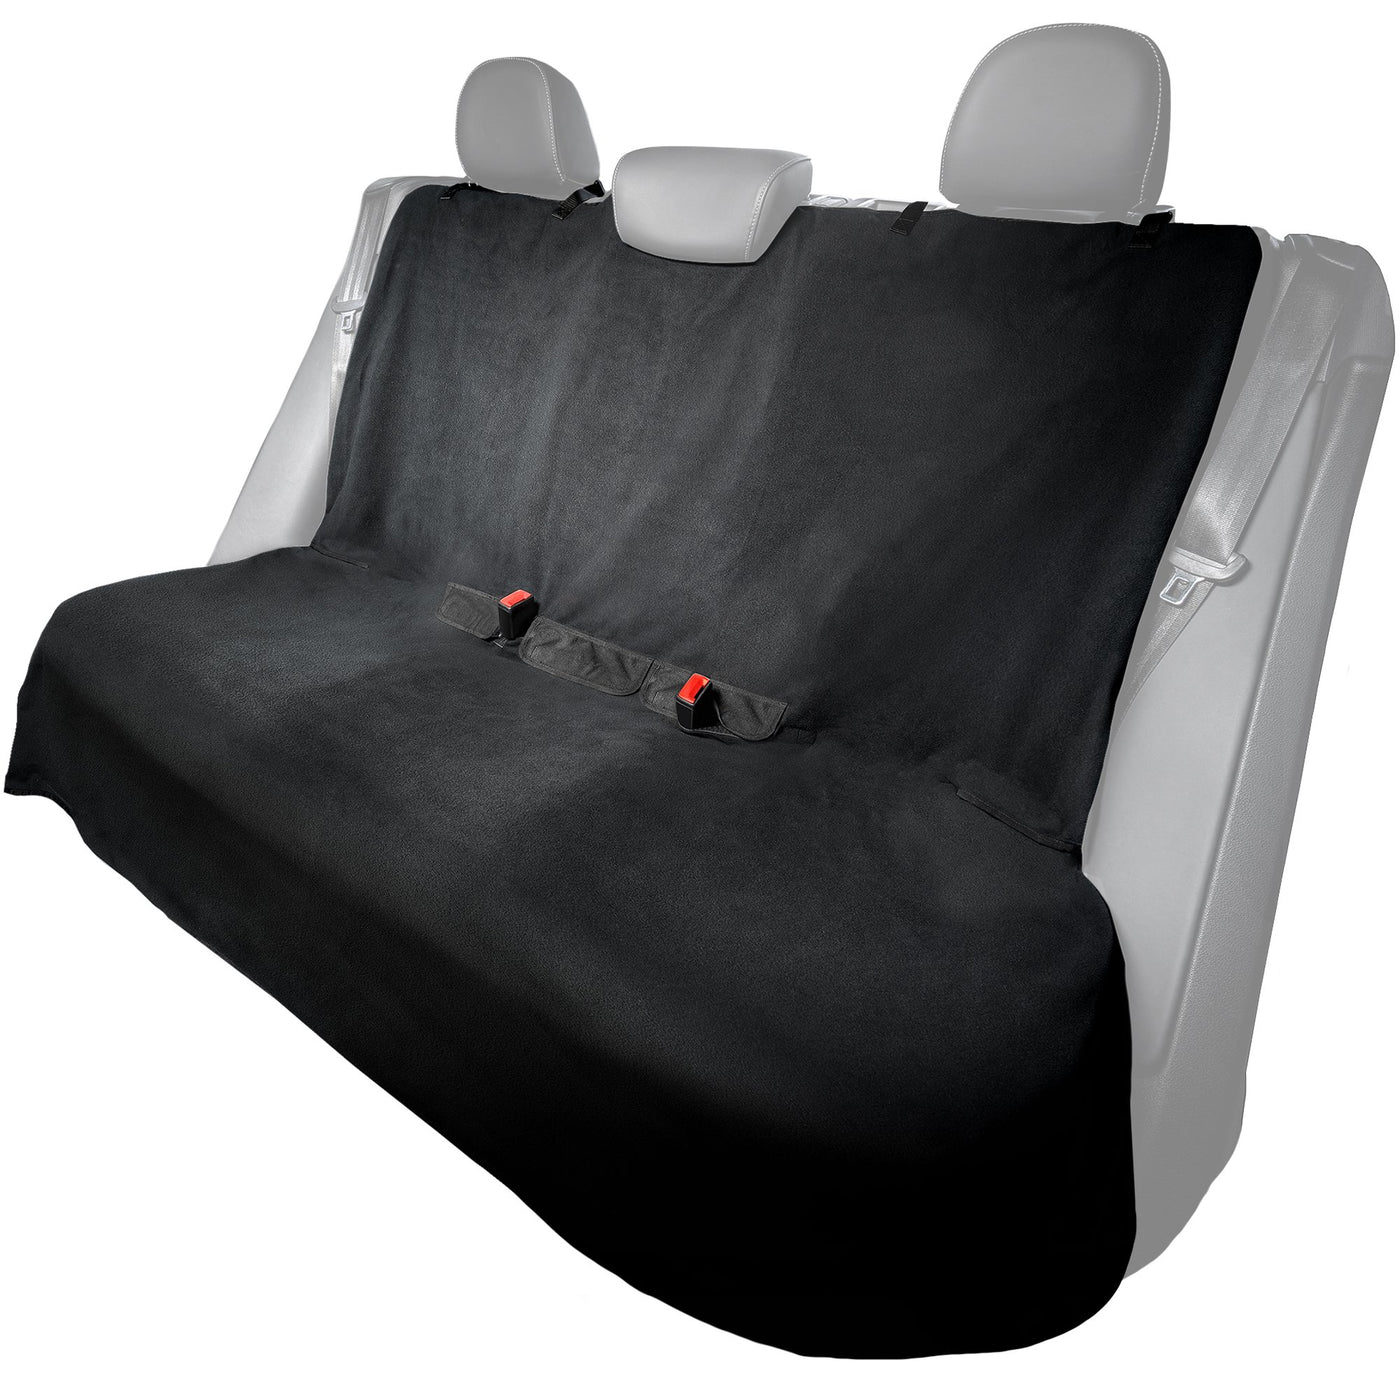 Seatshield Back Seat Cover for Dogs - Black